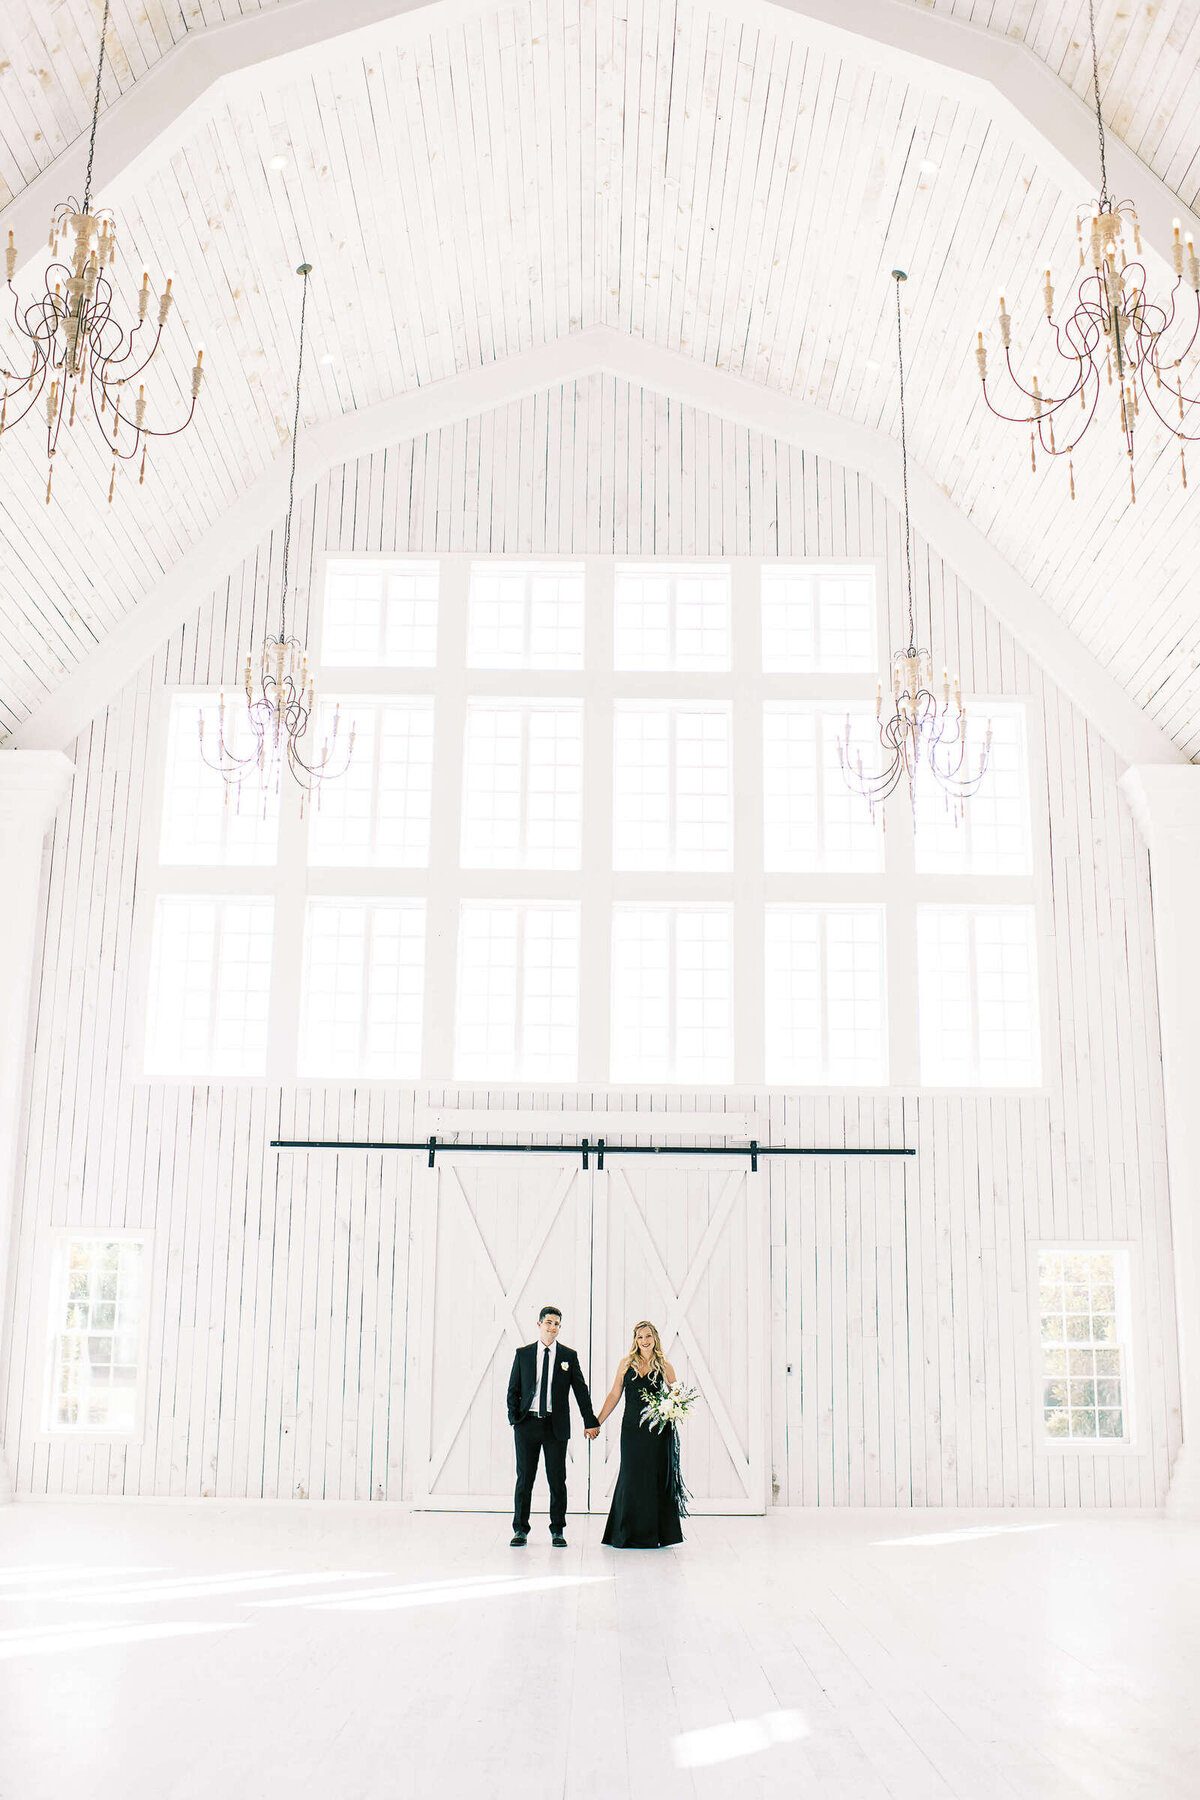 04 The White Sparrow Barn North Texas Engagement Kate Panza Photography Laura Lee and Justus